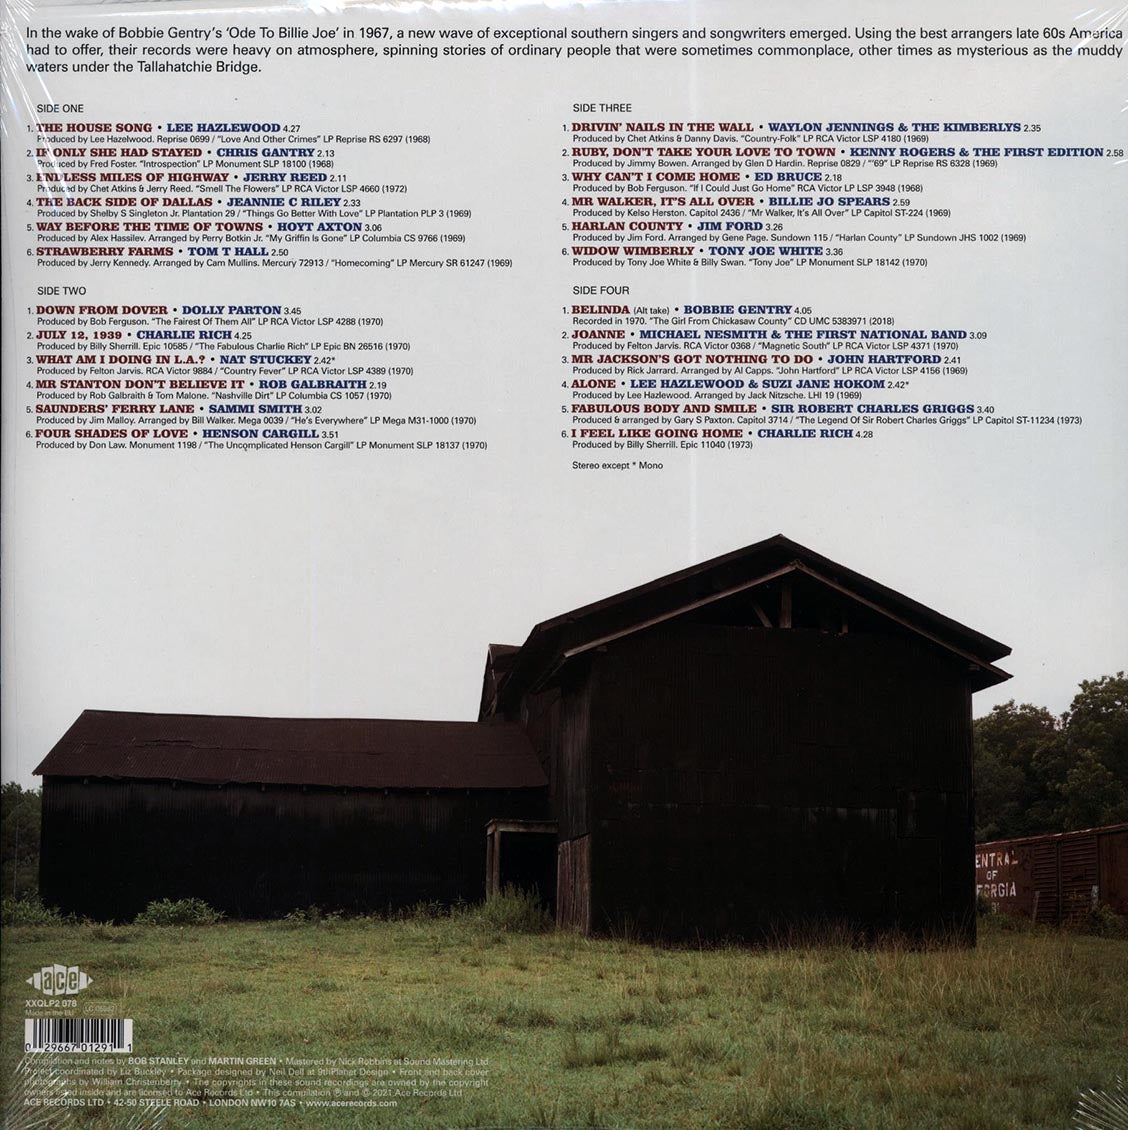 Lee Hazlewood, Hoyt Axton, Dolly Parton, Nat Stuckey, Etc. - Choctaw Ridge: New Fables Of The American South 1968-1973